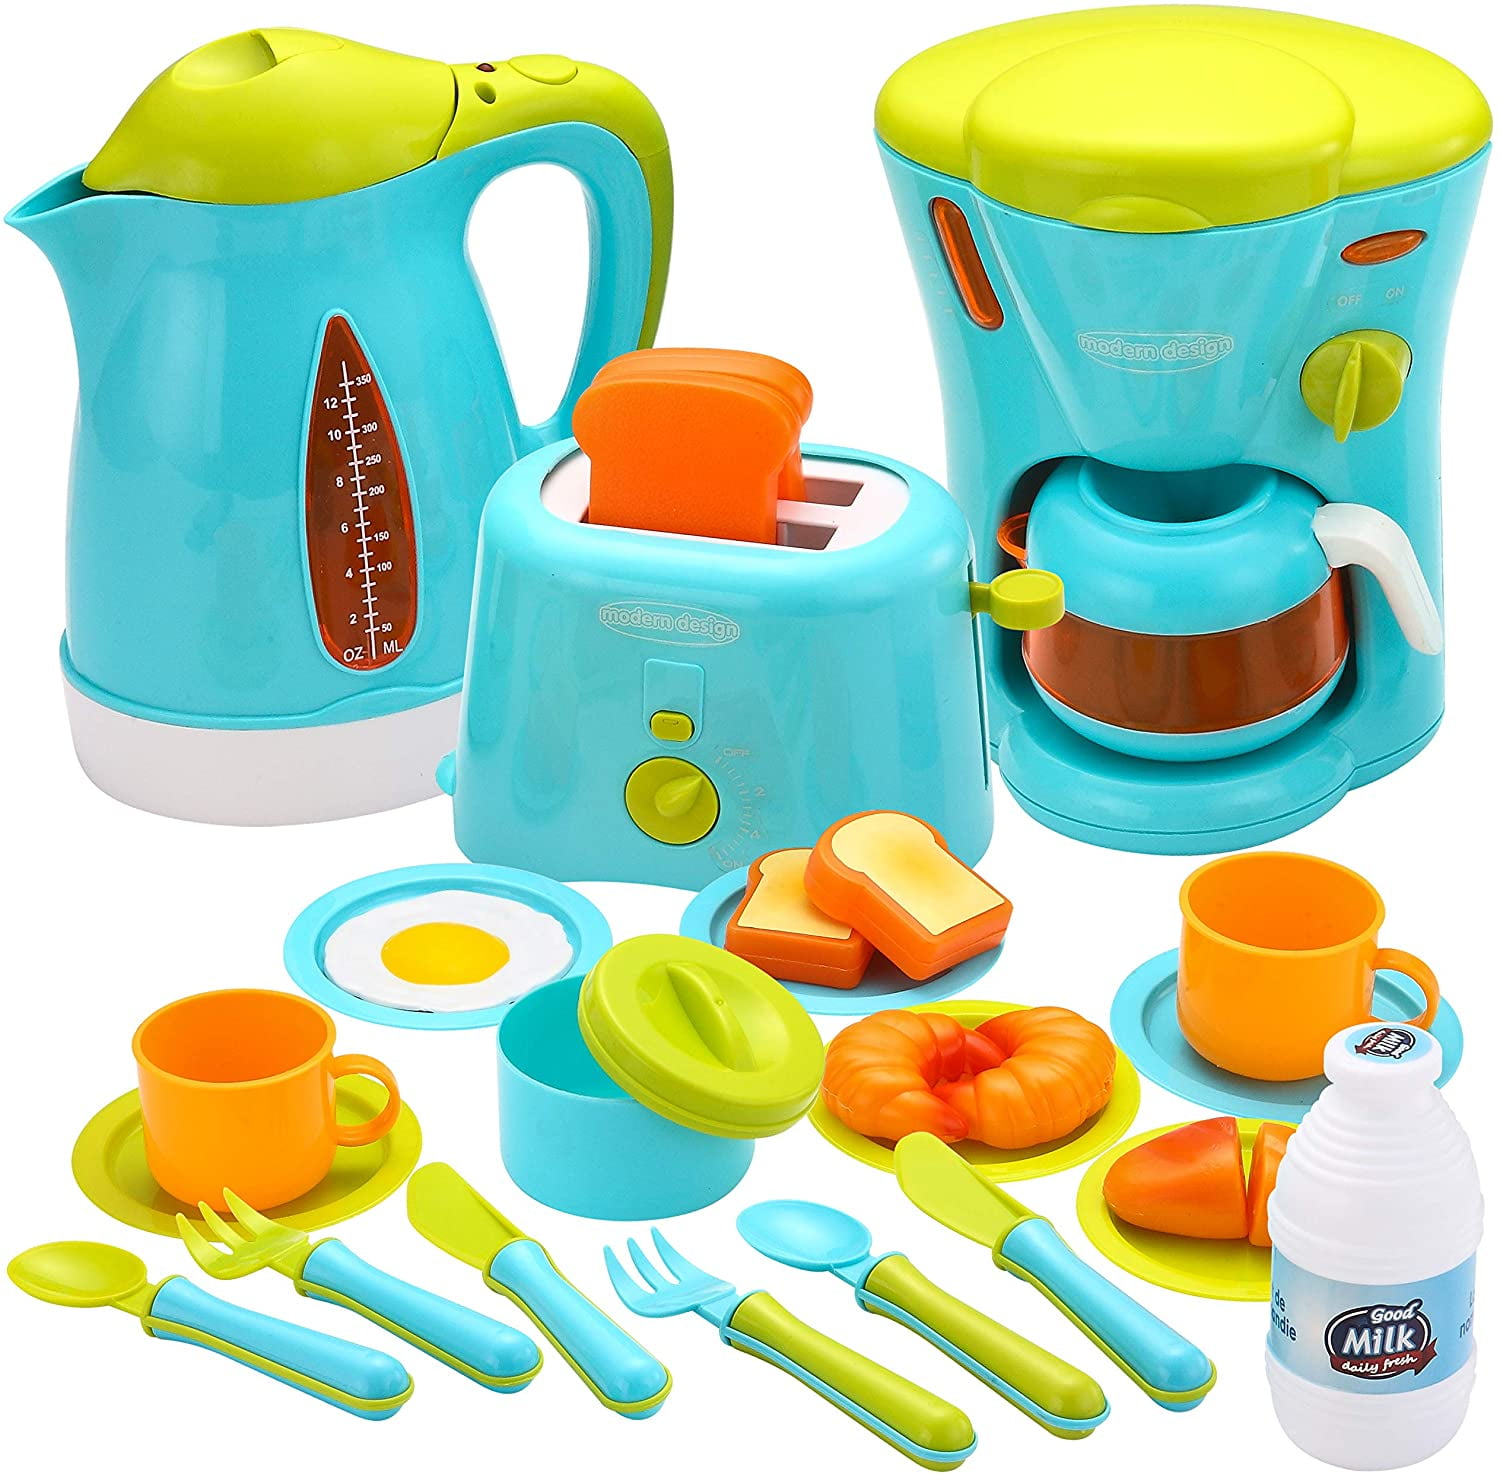 Simulation Pretend Play Kettle Kitchen Appliance Children Home Funny Gifts Toys 